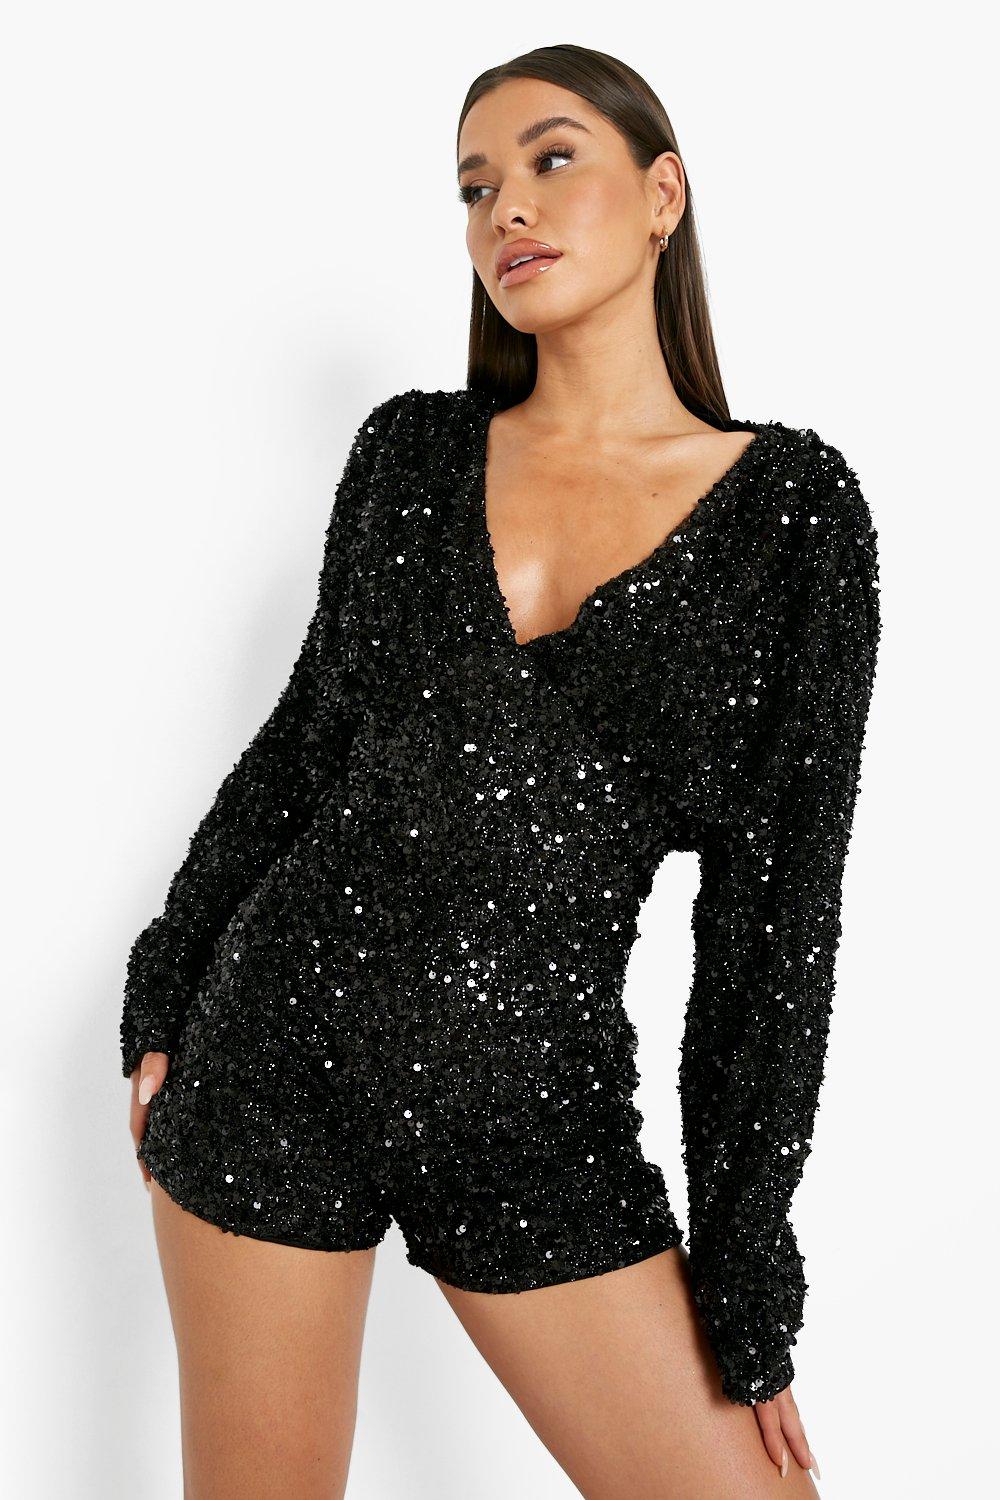 70s Clothes & 1970s Clothing, Outfits for Women Womens Sequin Plunge Extreme Batwing Romper - Black - 10 $48.00 AT vintagedancer.com